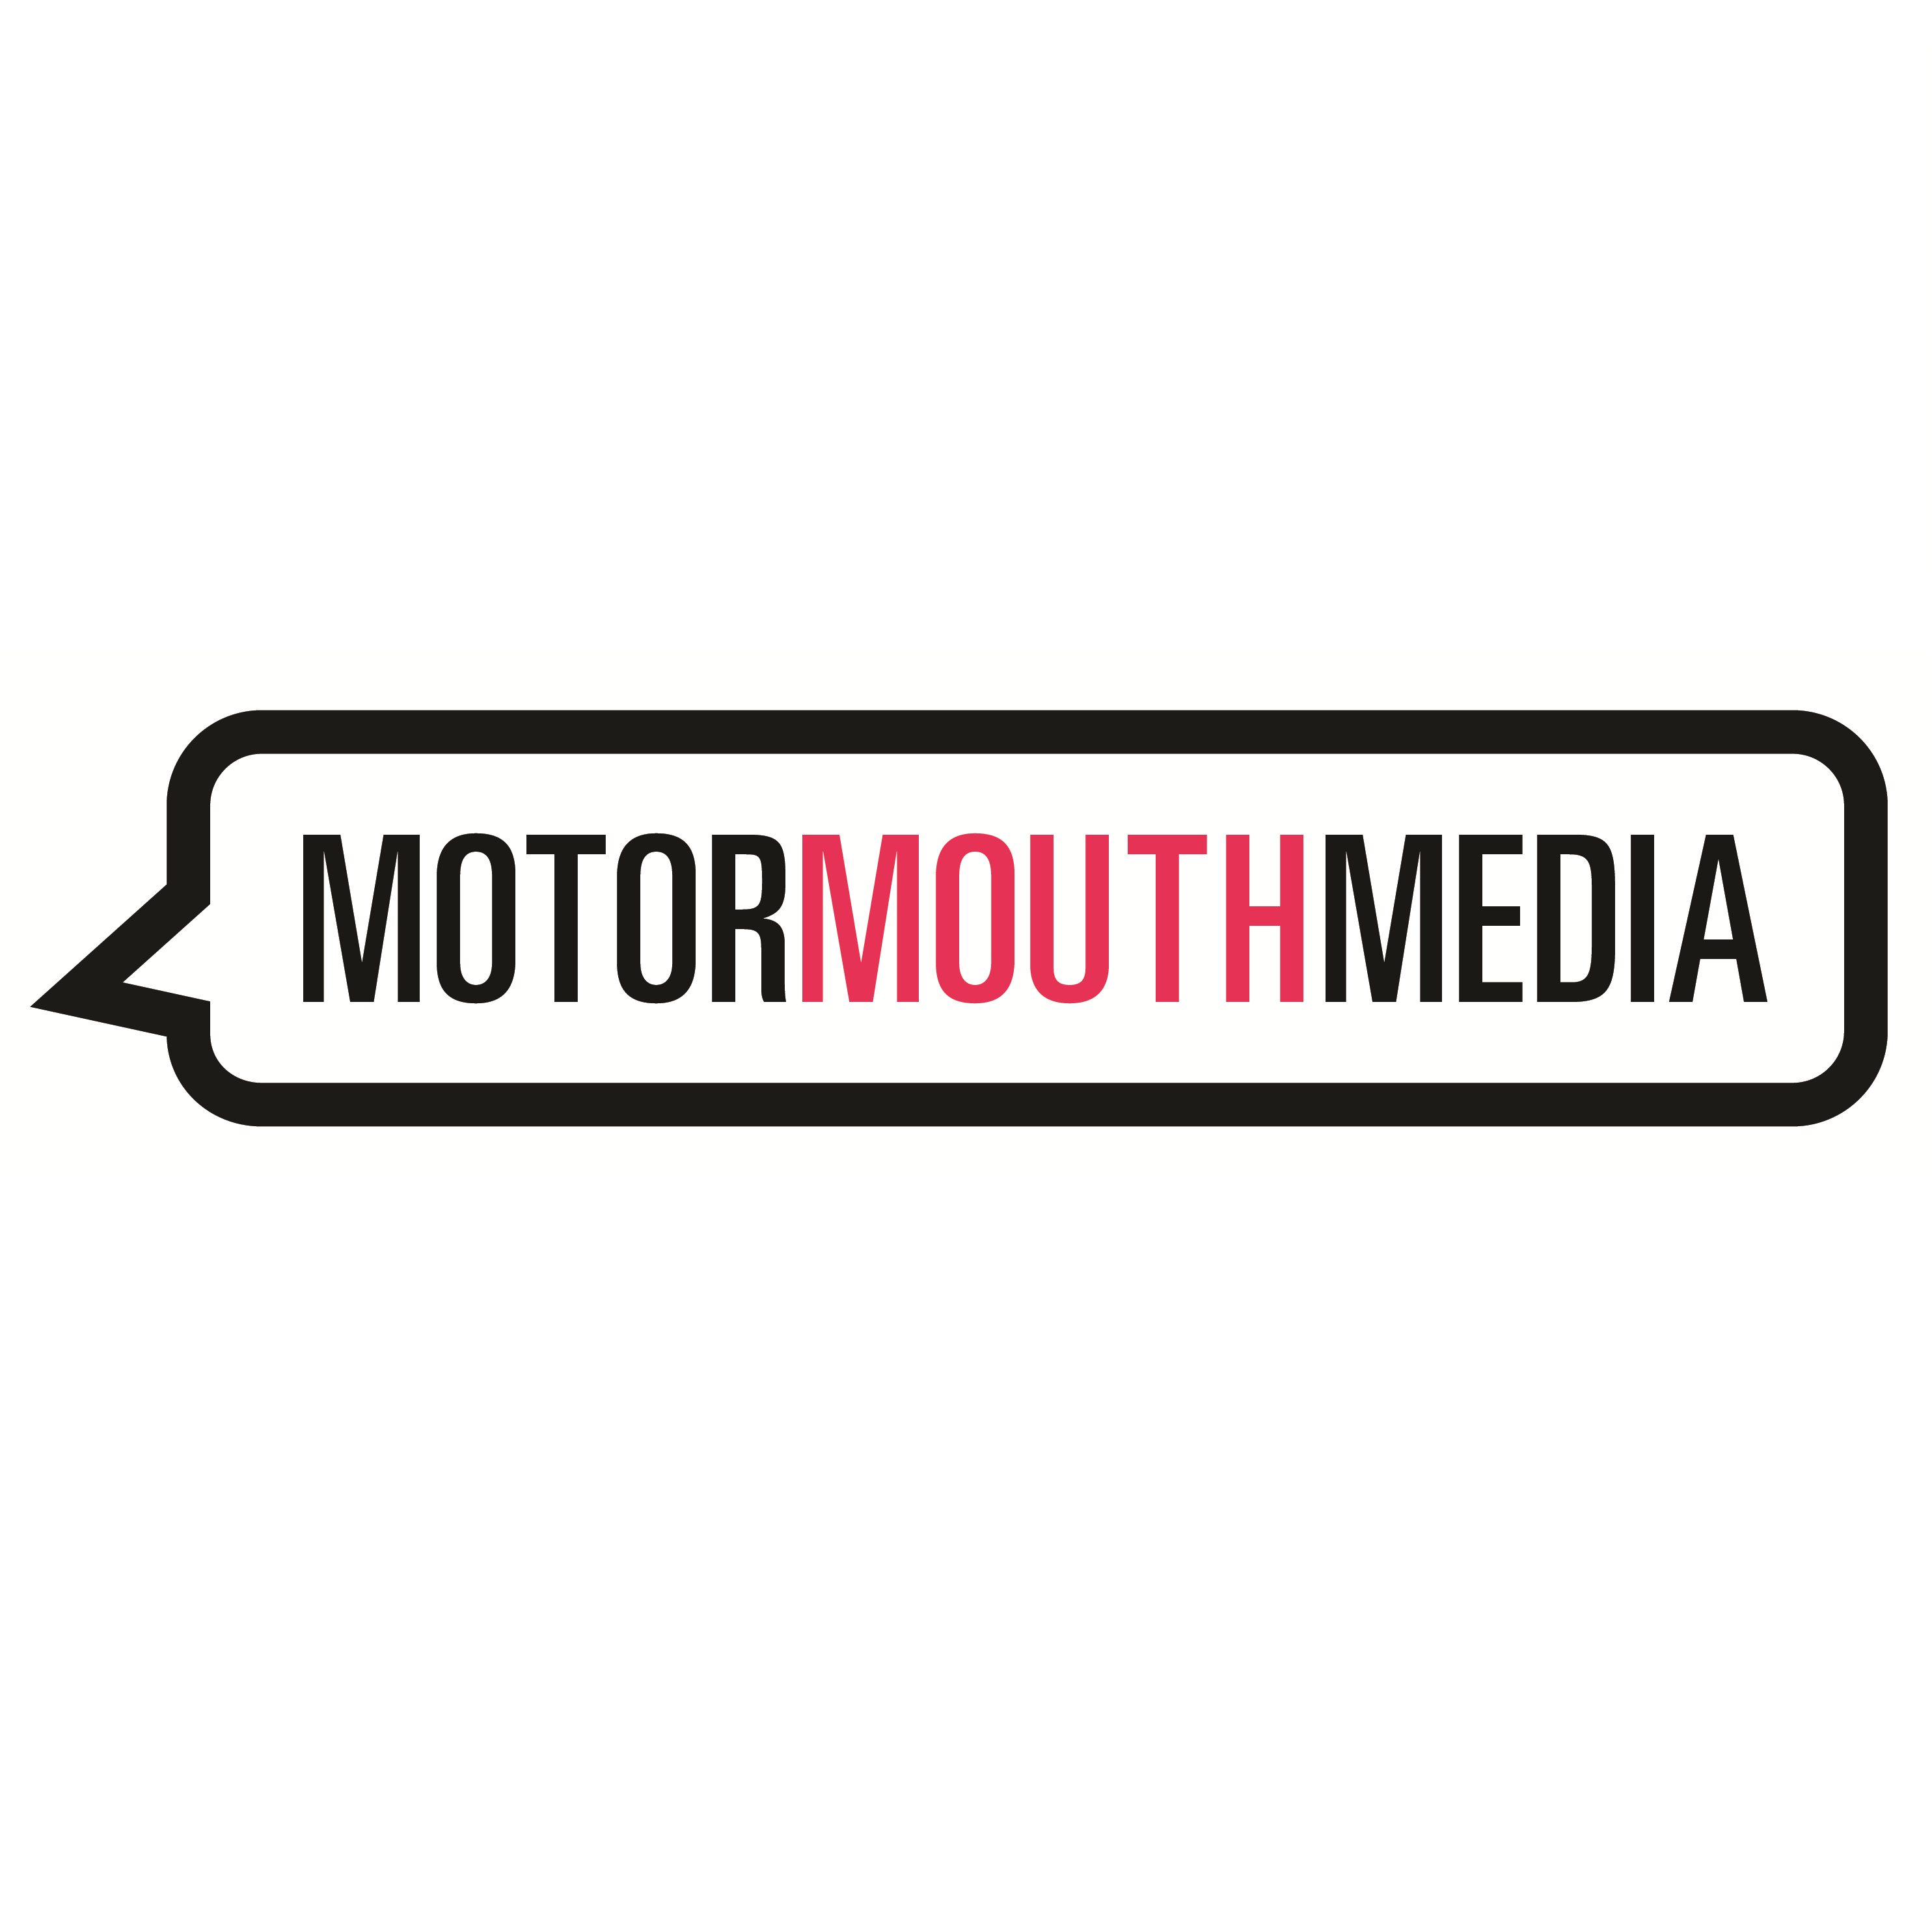 Official news & promo musings from your friends at Motormouthmedia. Publicity for Bands, Brands, Events and more.